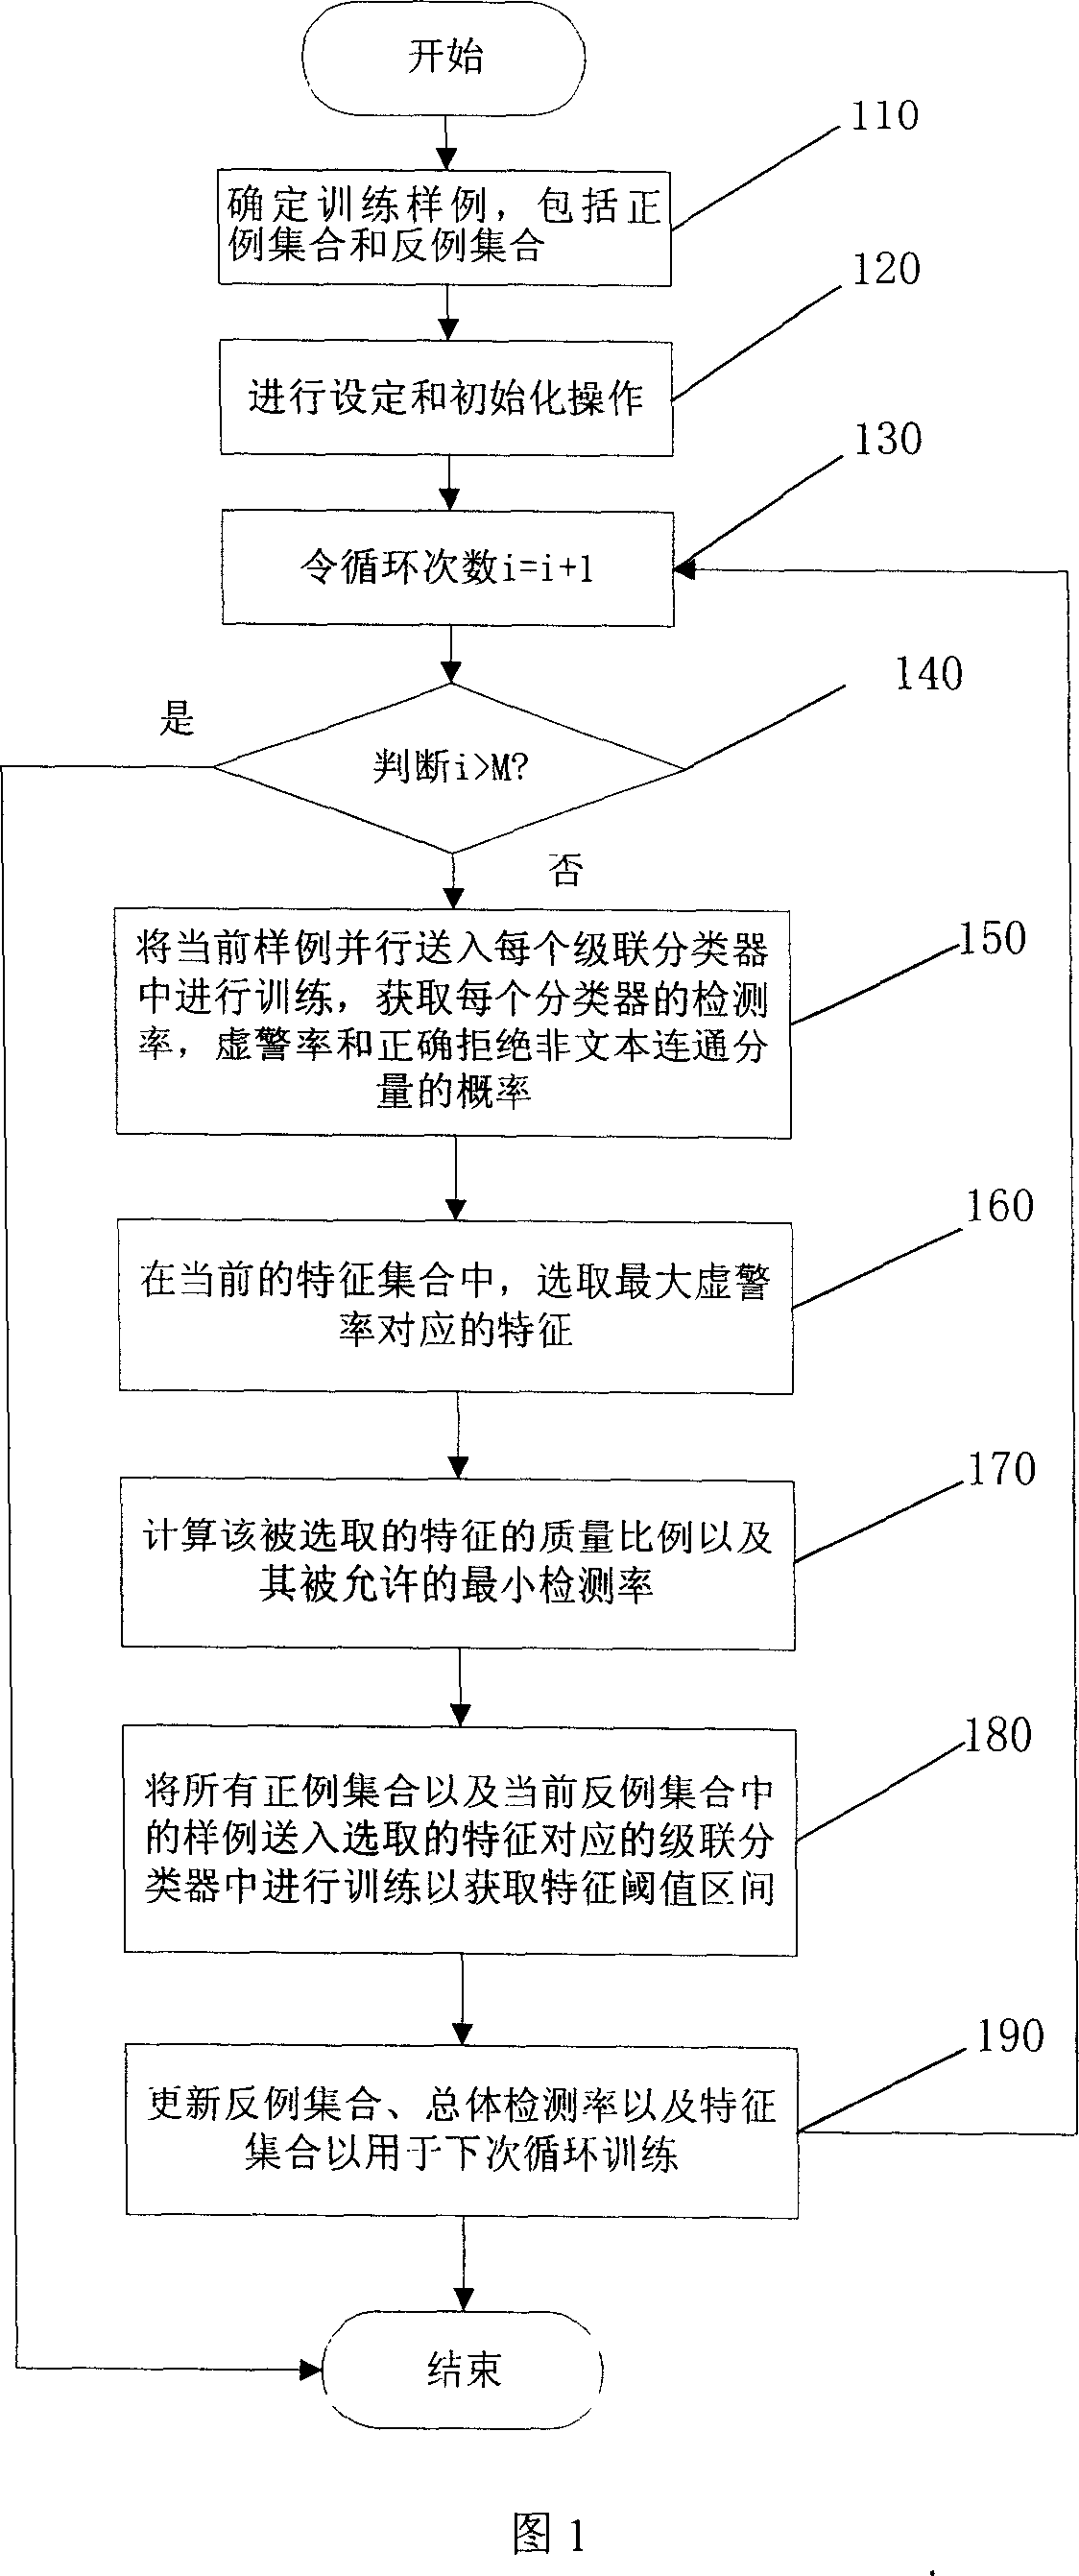 Method for determining connection sequence of cascade classifiers with different features and specific threshold